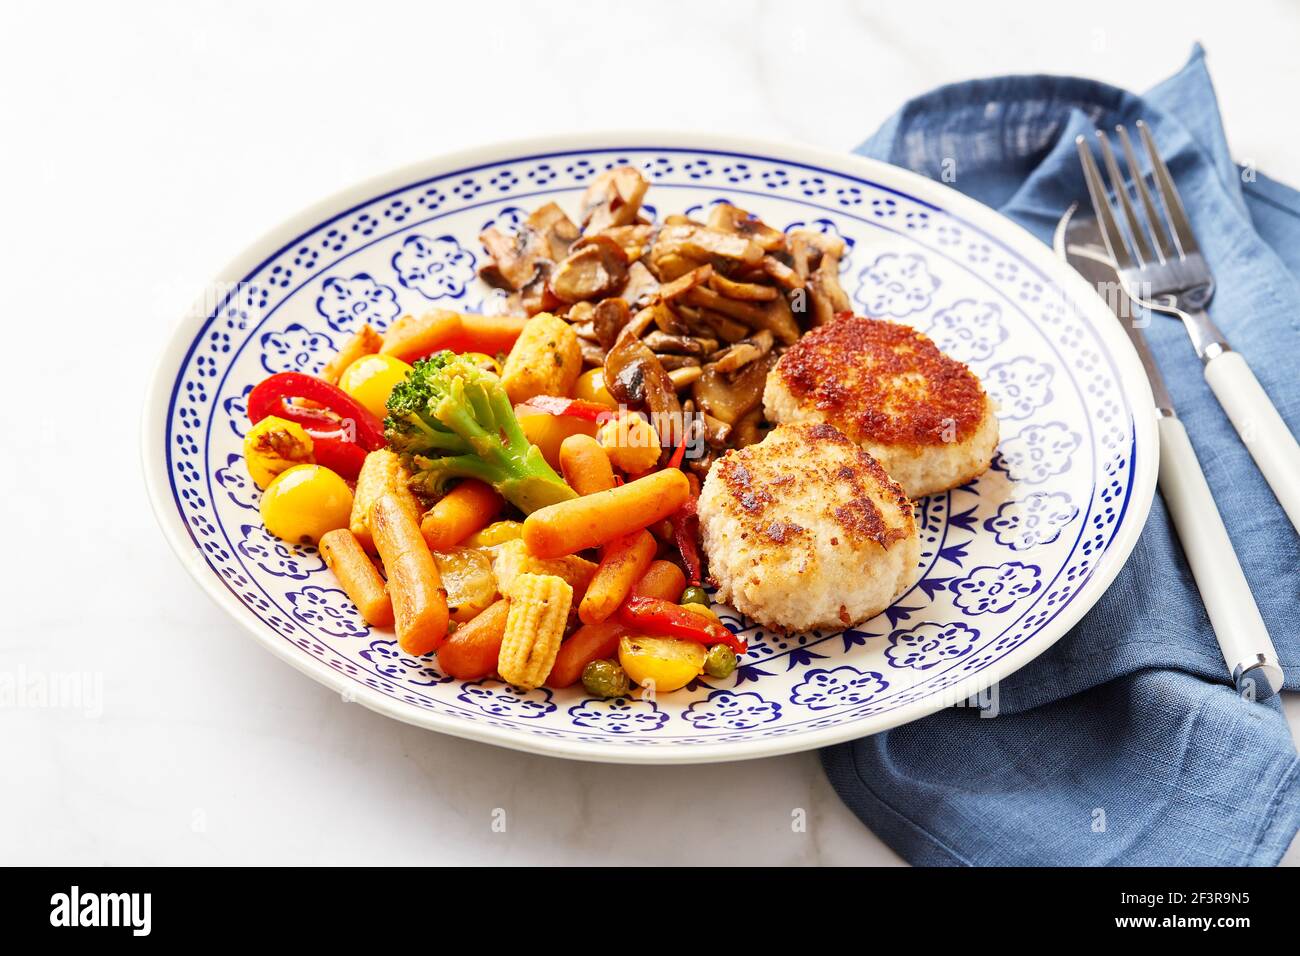 Mixed vegetables of carrots, broccoli, baby corn, bell peppers, roasted champignons and two chicken patties in breadcrumbs Stock Photo